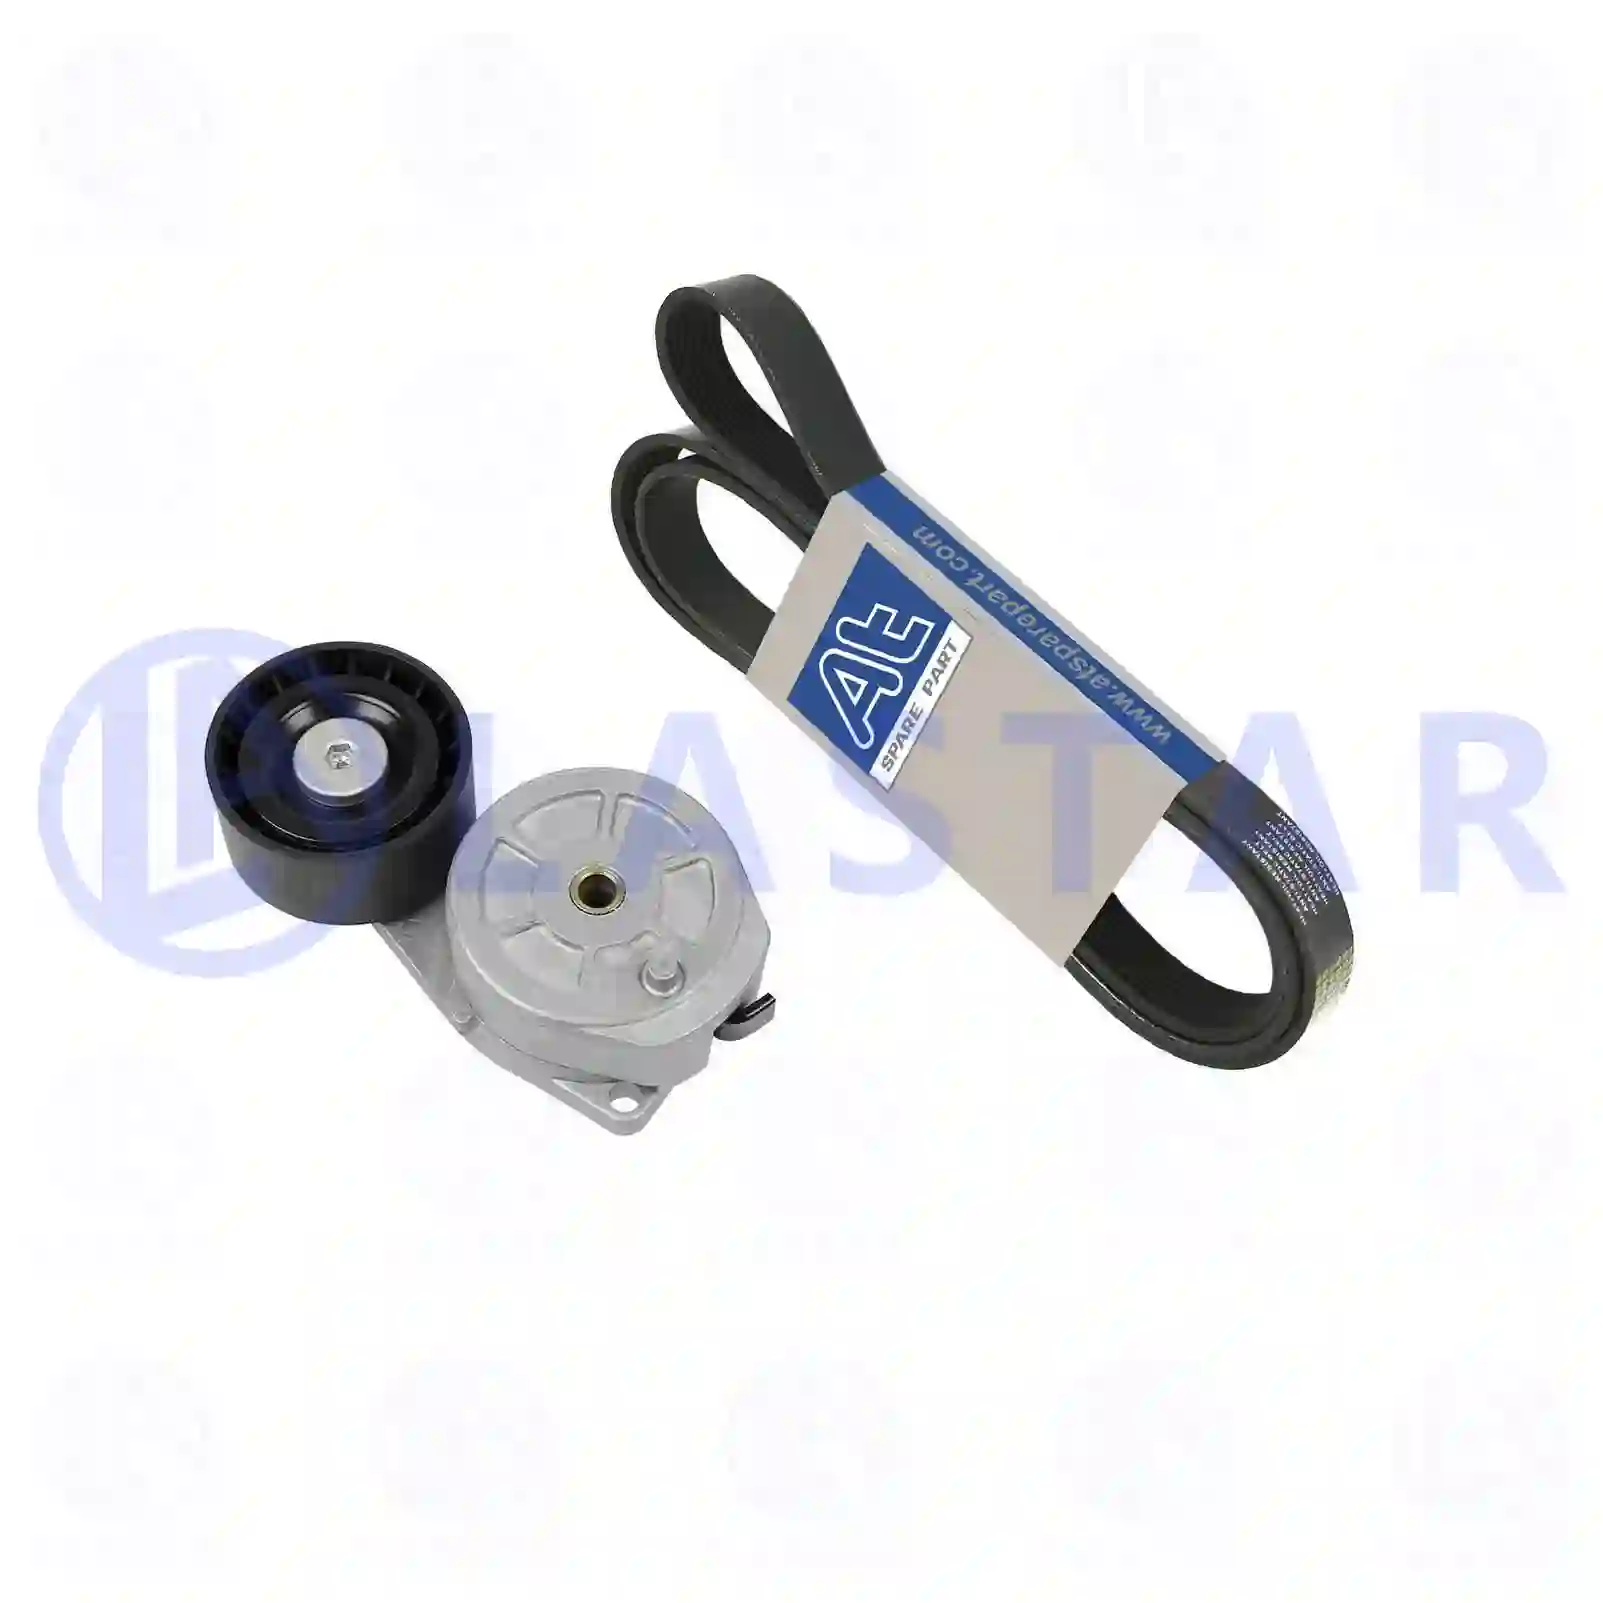 Belt tensioner, complete, with multiribbed belt, 77709952, 1512181S1, 1774650S1, 1774654S1, 1859657S1, 2197005S1 ||  77709952 Lastar Spare Part | Truck Spare Parts, Auotomotive Spare Parts Belt tensioner, complete, with multiribbed belt, 77709952, 1512181S1, 1774650S1, 1774654S1, 1859657S1, 2197005S1 ||  77709952 Lastar Spare Part | Truck Spare Parts, Auotomotive Spare Parts